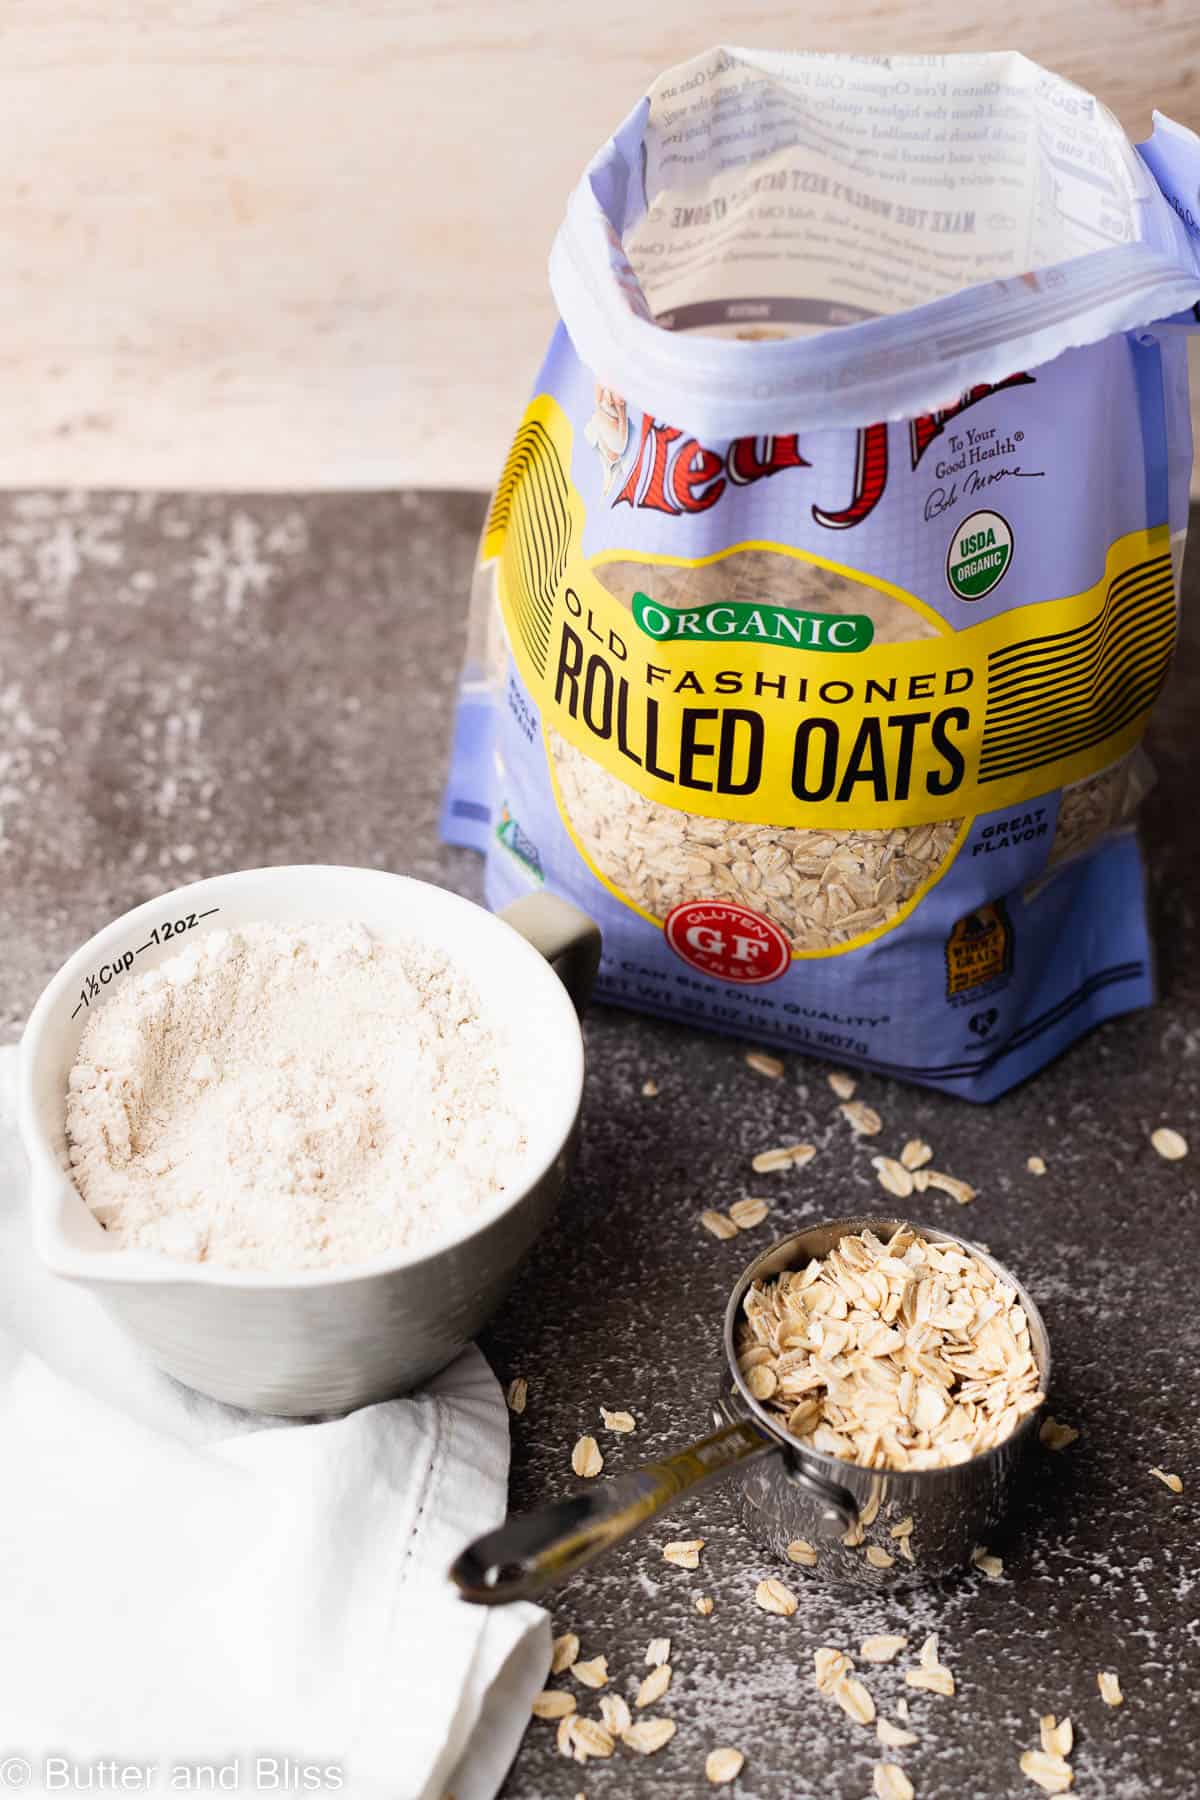 Rolled oats in a bag with a bowl of oat flour next to it.